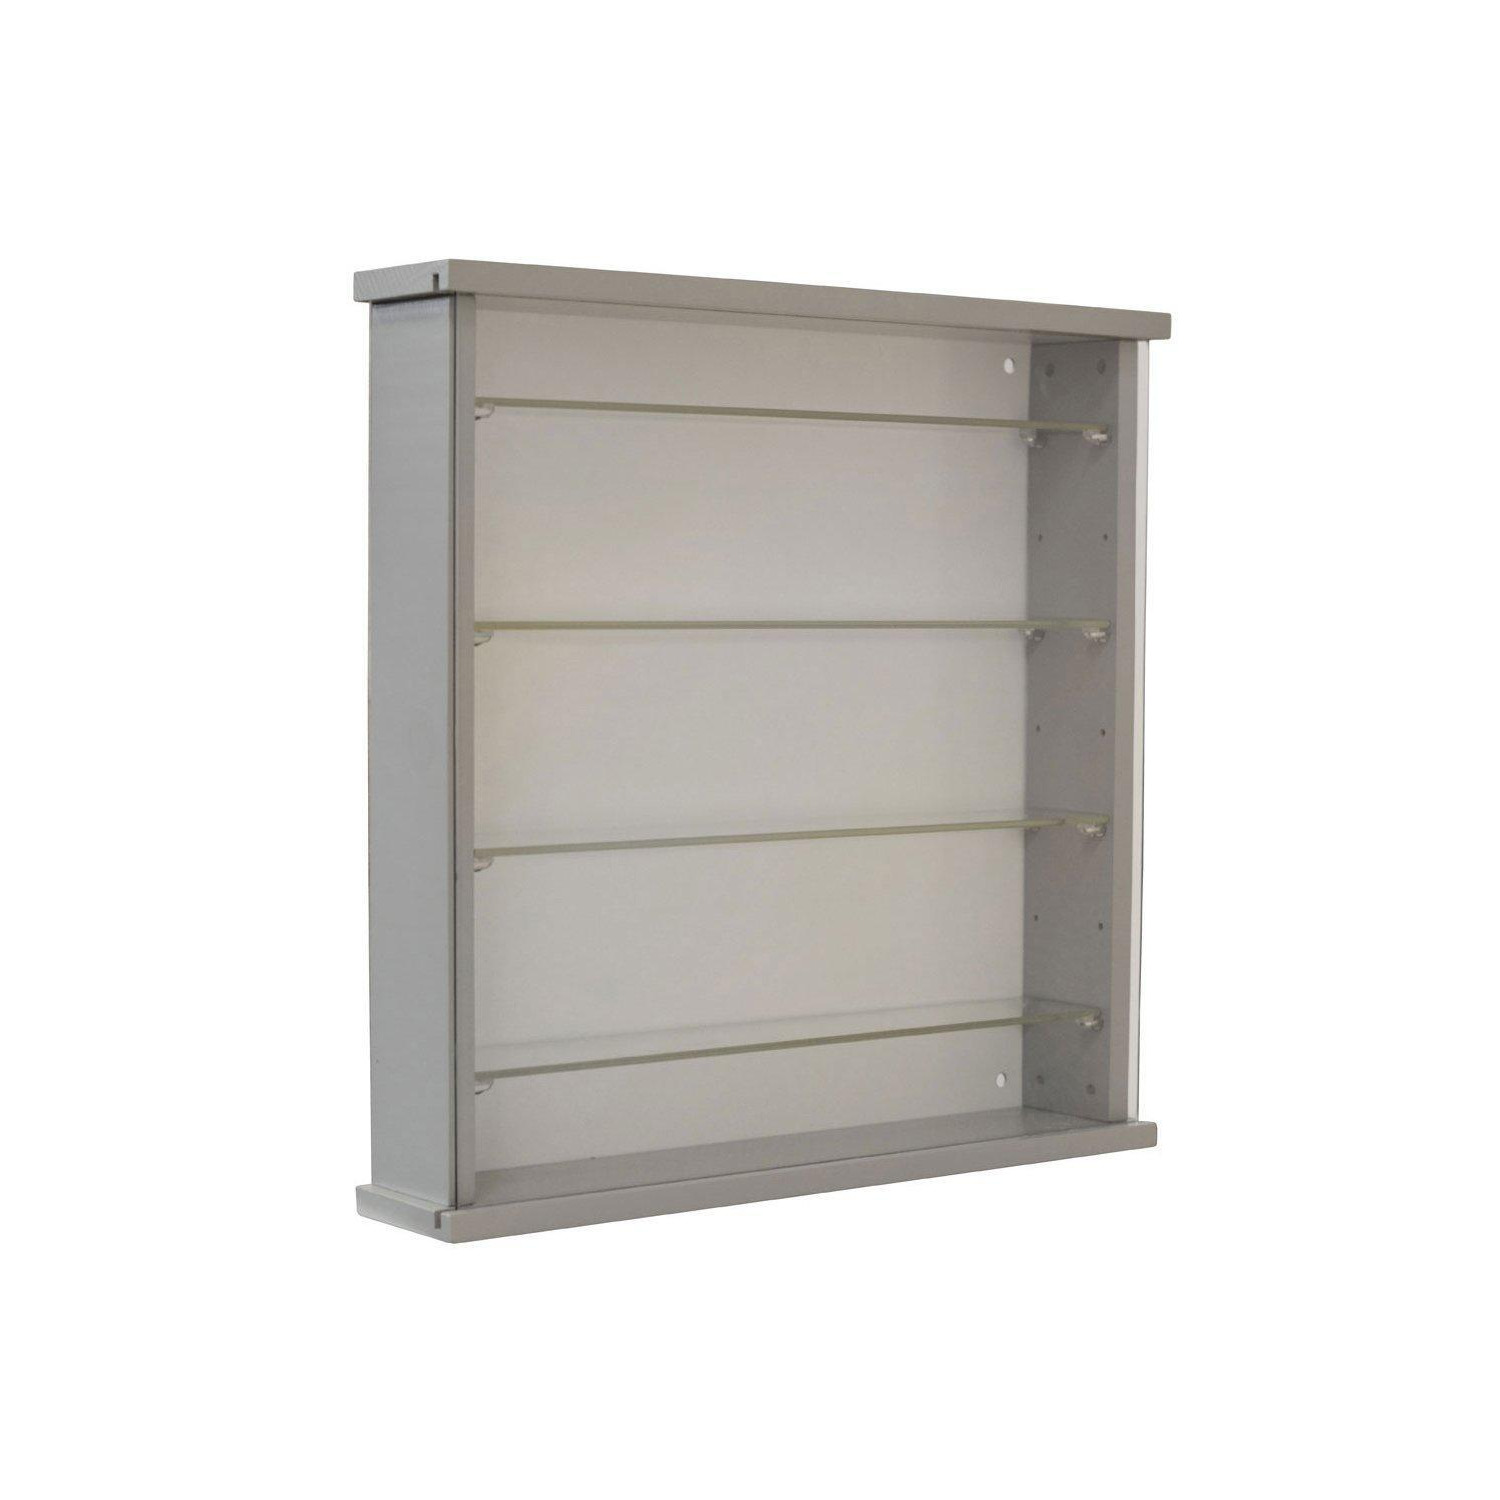 Wood Wall Display Cabinet With 4 Adjustable Glass Shelves  Grey - image 1